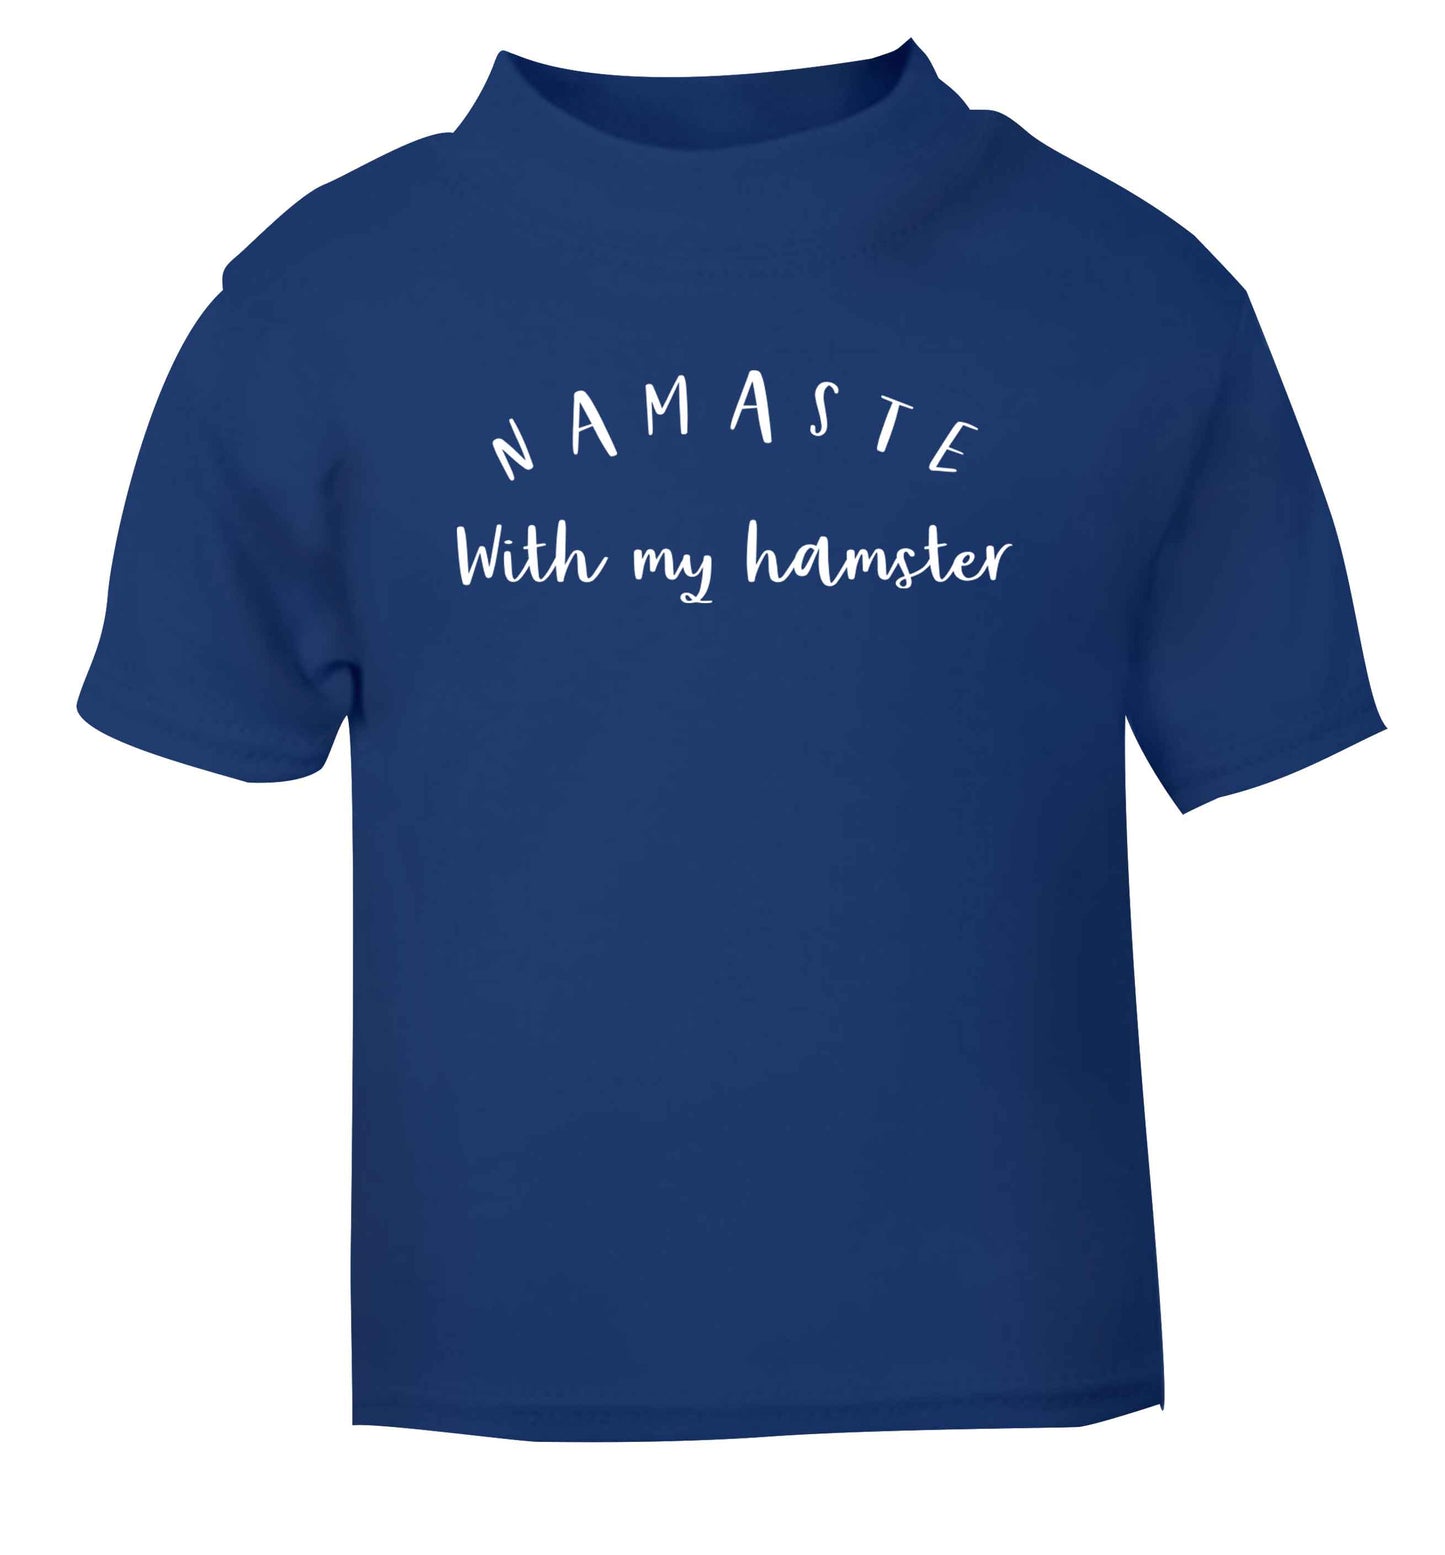 Namaste with my hamster blue Baby Toddler Tshirt 2 Years